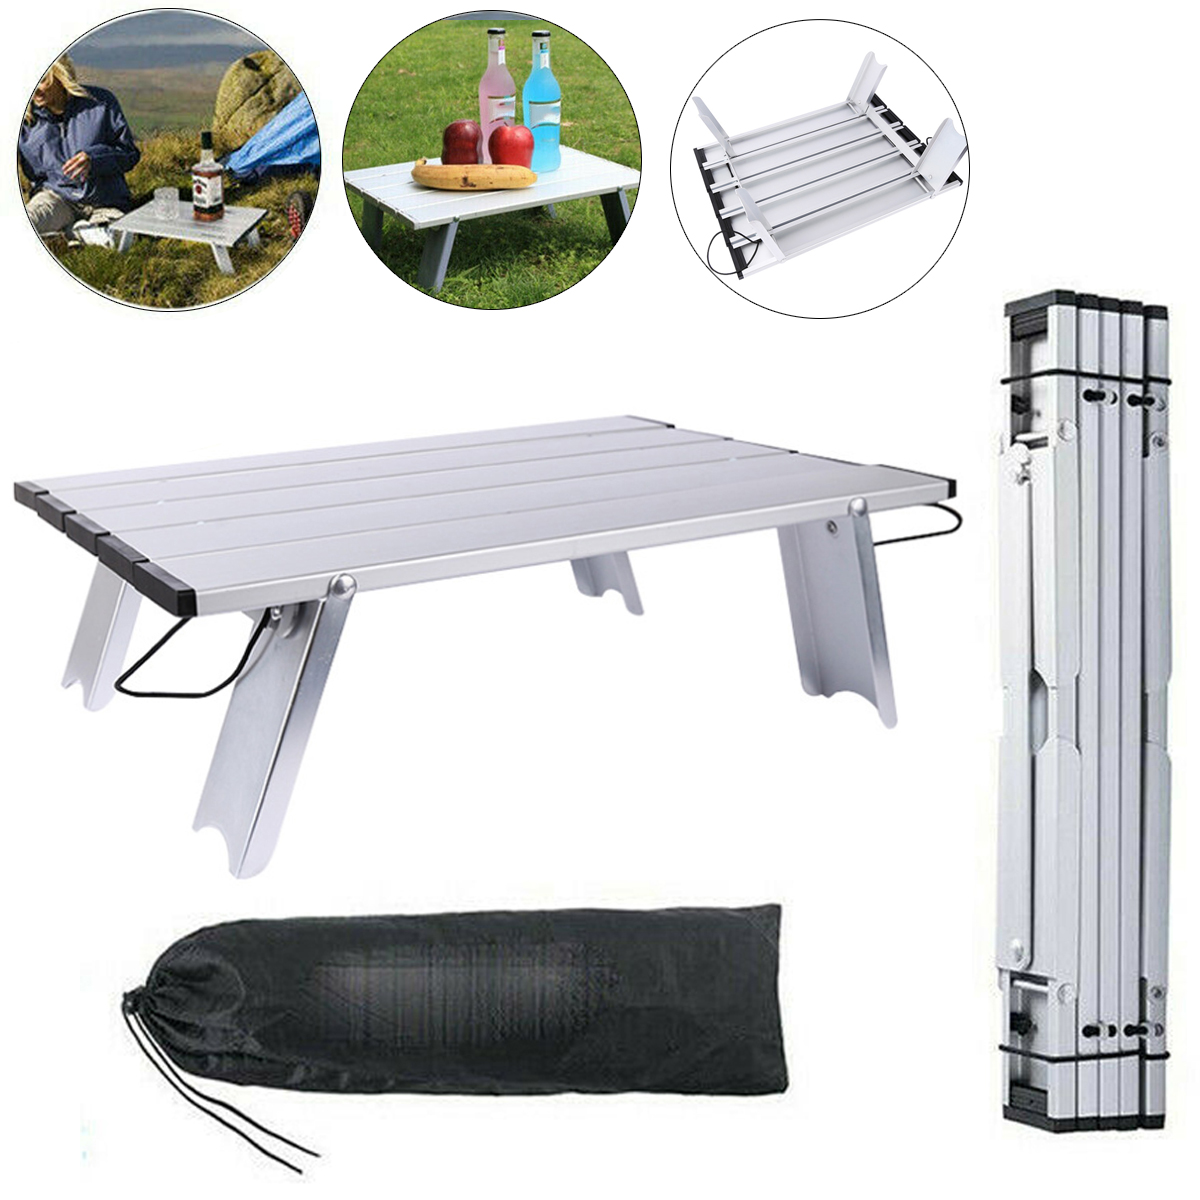 Mini-Portable-Metal-Camping-Table-Lightweight-Foldable-Compact-Hiking-Outdoor-1721344-6